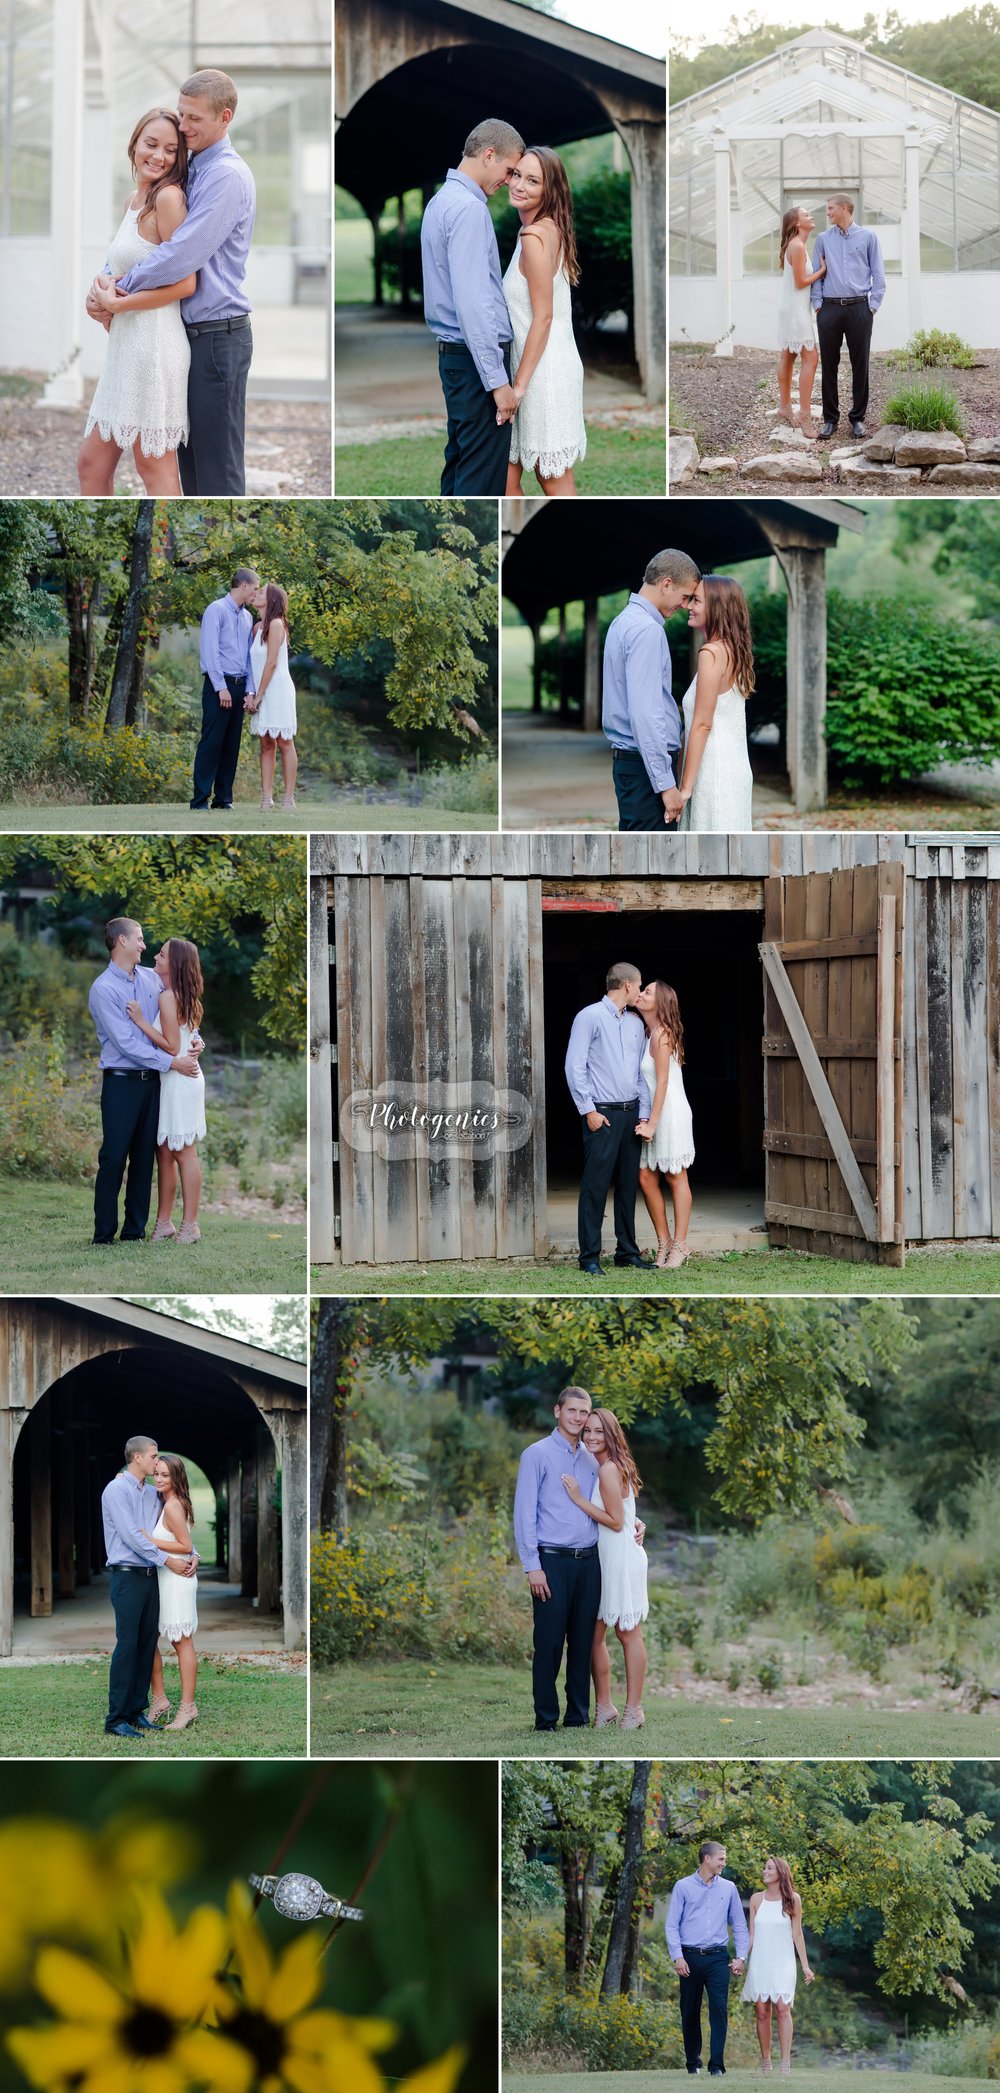  engagement_session_farm_outdoors_photography_couple_wedding_new_haven_mo_st_louis_photographer 1 